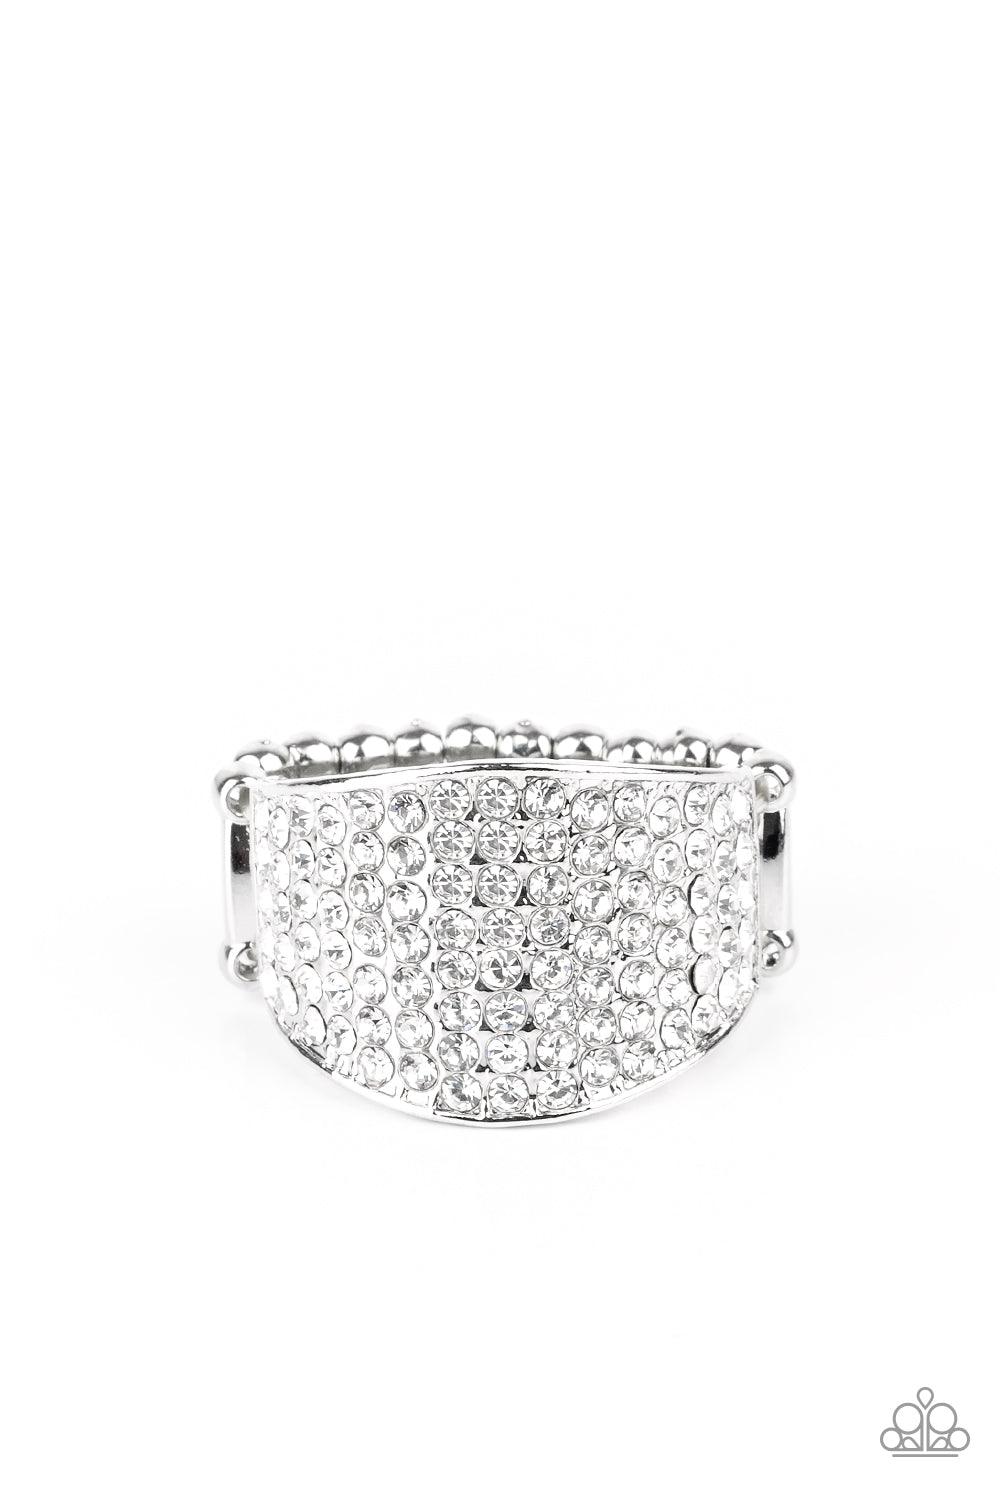 Paparazzi Accessories Kaboom! - White Countless white rhinestones are encrusted along a thick silver band for a spellbinding look. Features a stretchy band for a flexible fit. Sold as one individual ring. Jewelry